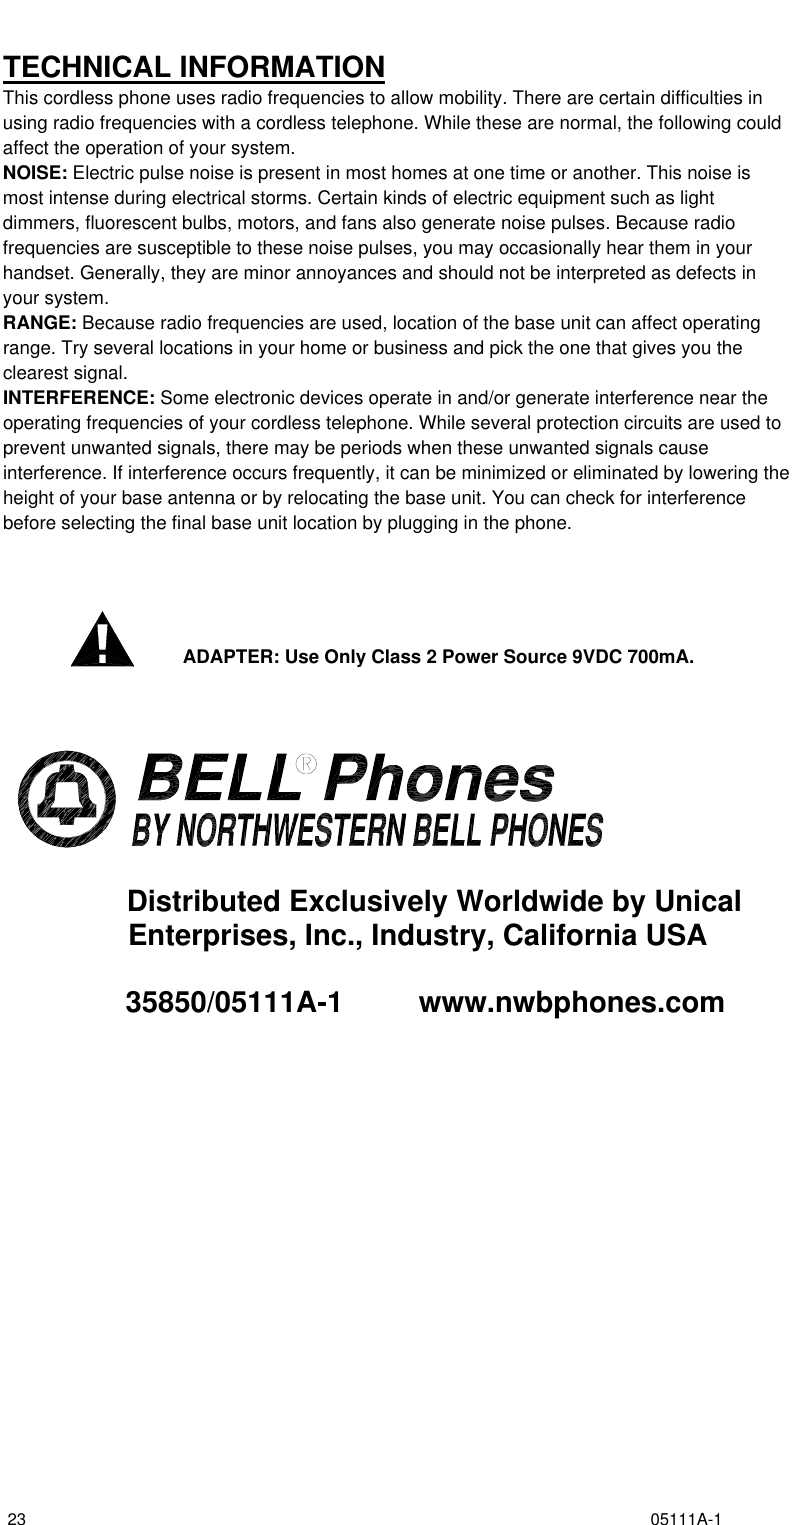   23                                                                                                                                       05111A-1  TECHNICAL INFORMATION This cordless phone uses radio frequencies to allow mobility. There are certain difficulties in using radio frequencies with a cordless telephone. While these are normal, the following could affect the operation of your system. NOISE: Electric pulse noise is present in most homes at one time or another. This noise is most intense during electrical storms. Certain kinds of electric equipment such as light dimmers, fluorescent bulbs, motors, and fans also generate noise pulses. Because radio frequencies are susceptible to these noise pulses, you may occasionally hear them in your handset. Generally, they are minor annoyances and should not be interpreted as defects in your system. RANGE: Because radio frequencies are used, location of the base unit can affect operating range. Try several locations in your home or business and pick the one that gives you the clearest signal. INTERFERENCE: Some electronic devices operate in and/or generate interference near the operating frequencies of your cordless telephone. While several protection circuits are used to prevent unwanted signals, there may be periods when these unwanted signals cause interference. If interference occurs frequently, it can be minimized or eliminated by lowering the height of your base antenna or by relocating the base unit. You can check for interference before selecting the final base unit location by plugging in the phone.      ADAPTER: Use Only Class 2 Power Source 9VDC 700mA.            Distributed Exclusively Worldwide by Unical Enterprises, Inc., Industry, California USA        35850/05111A-1          www.nwbphones.com   